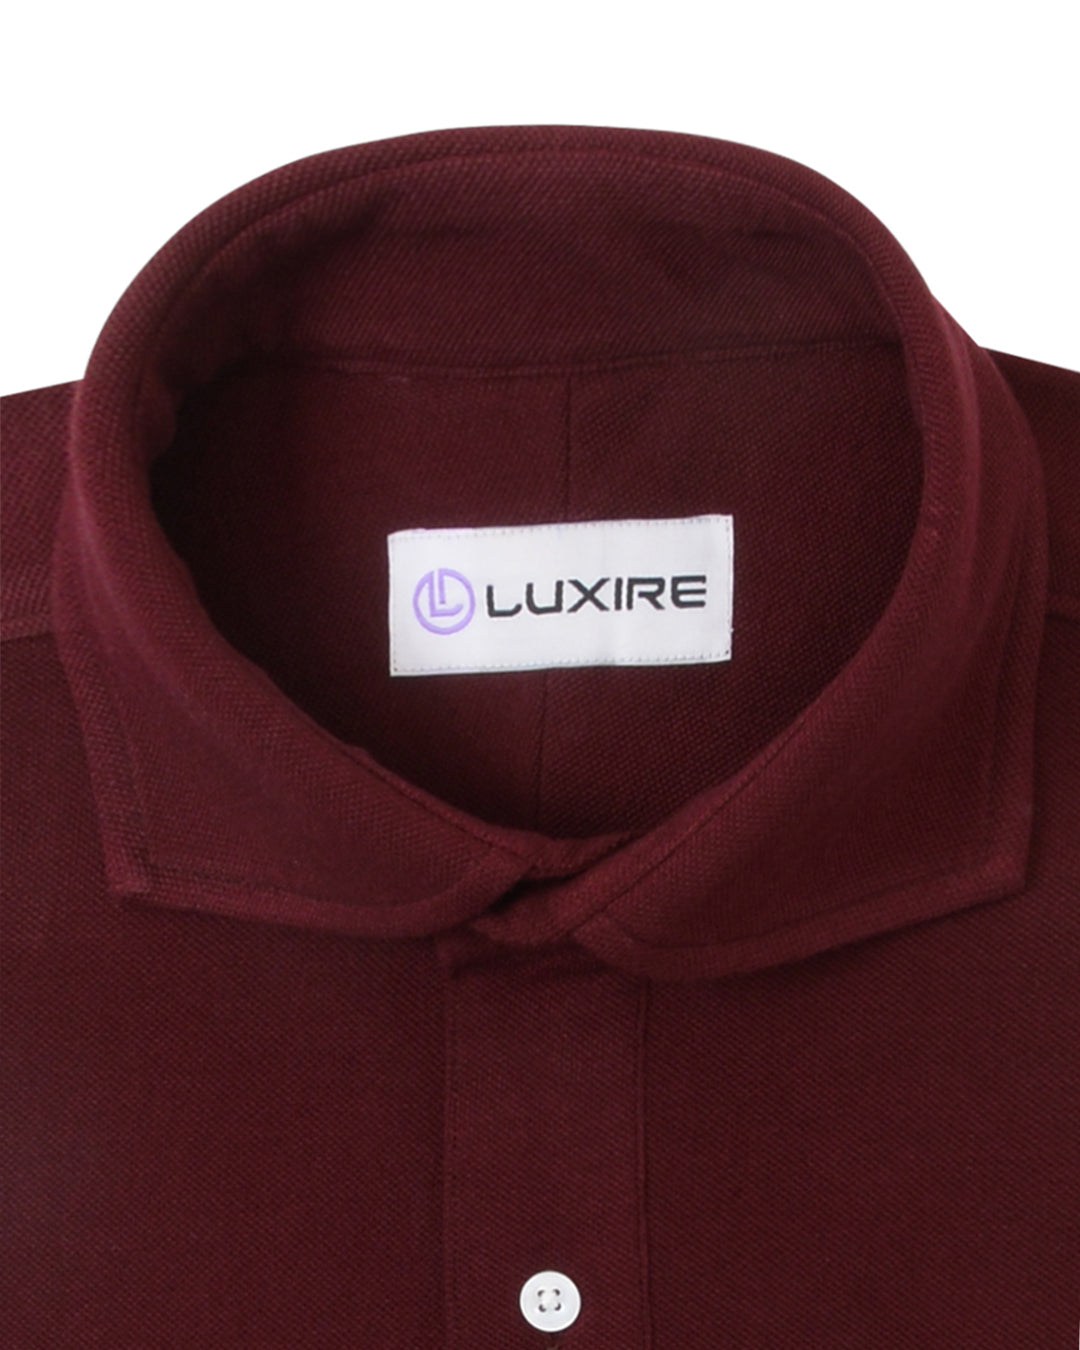 Collar of the custom oxford polo shirt for men by Luxire in deep maroon